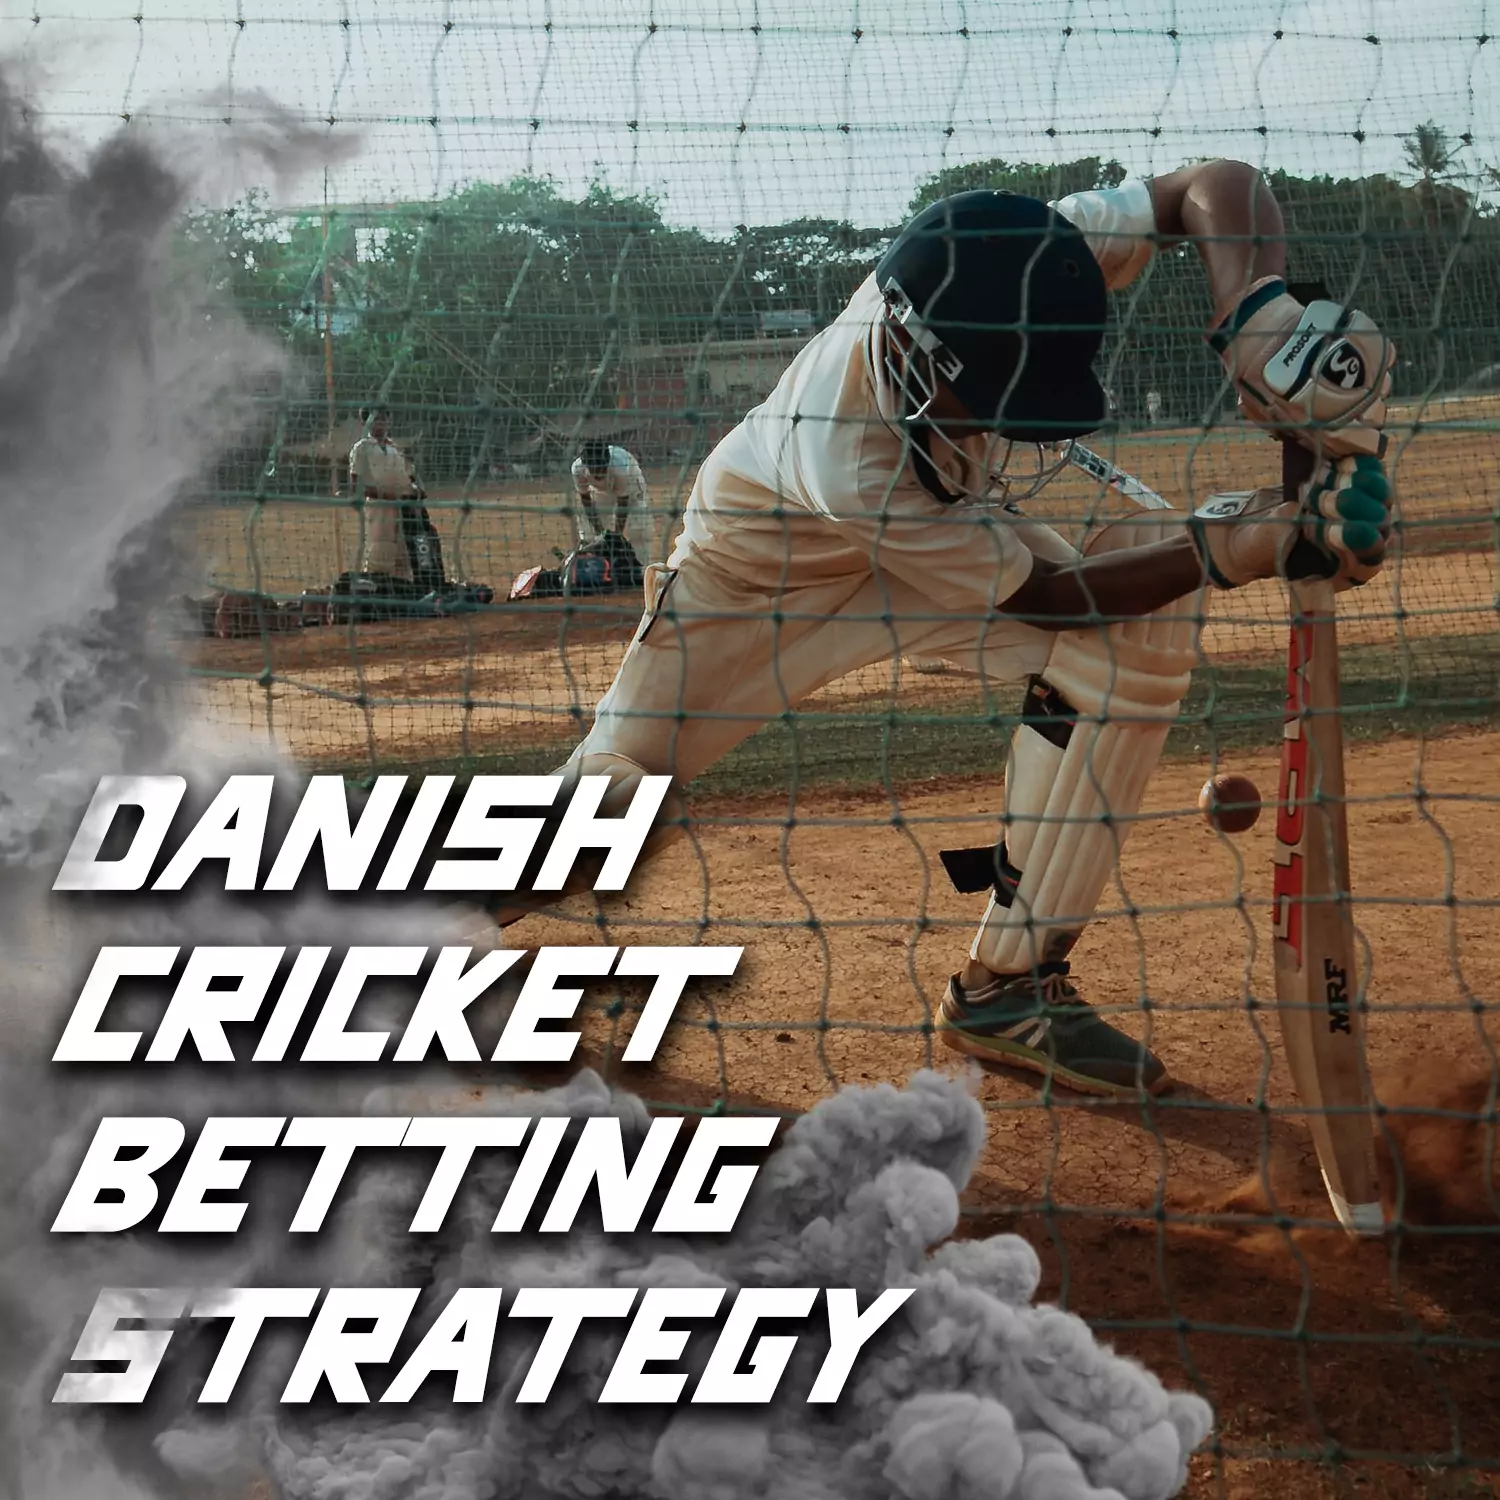 Using the Danish cricket betting strategy can bring good luck.